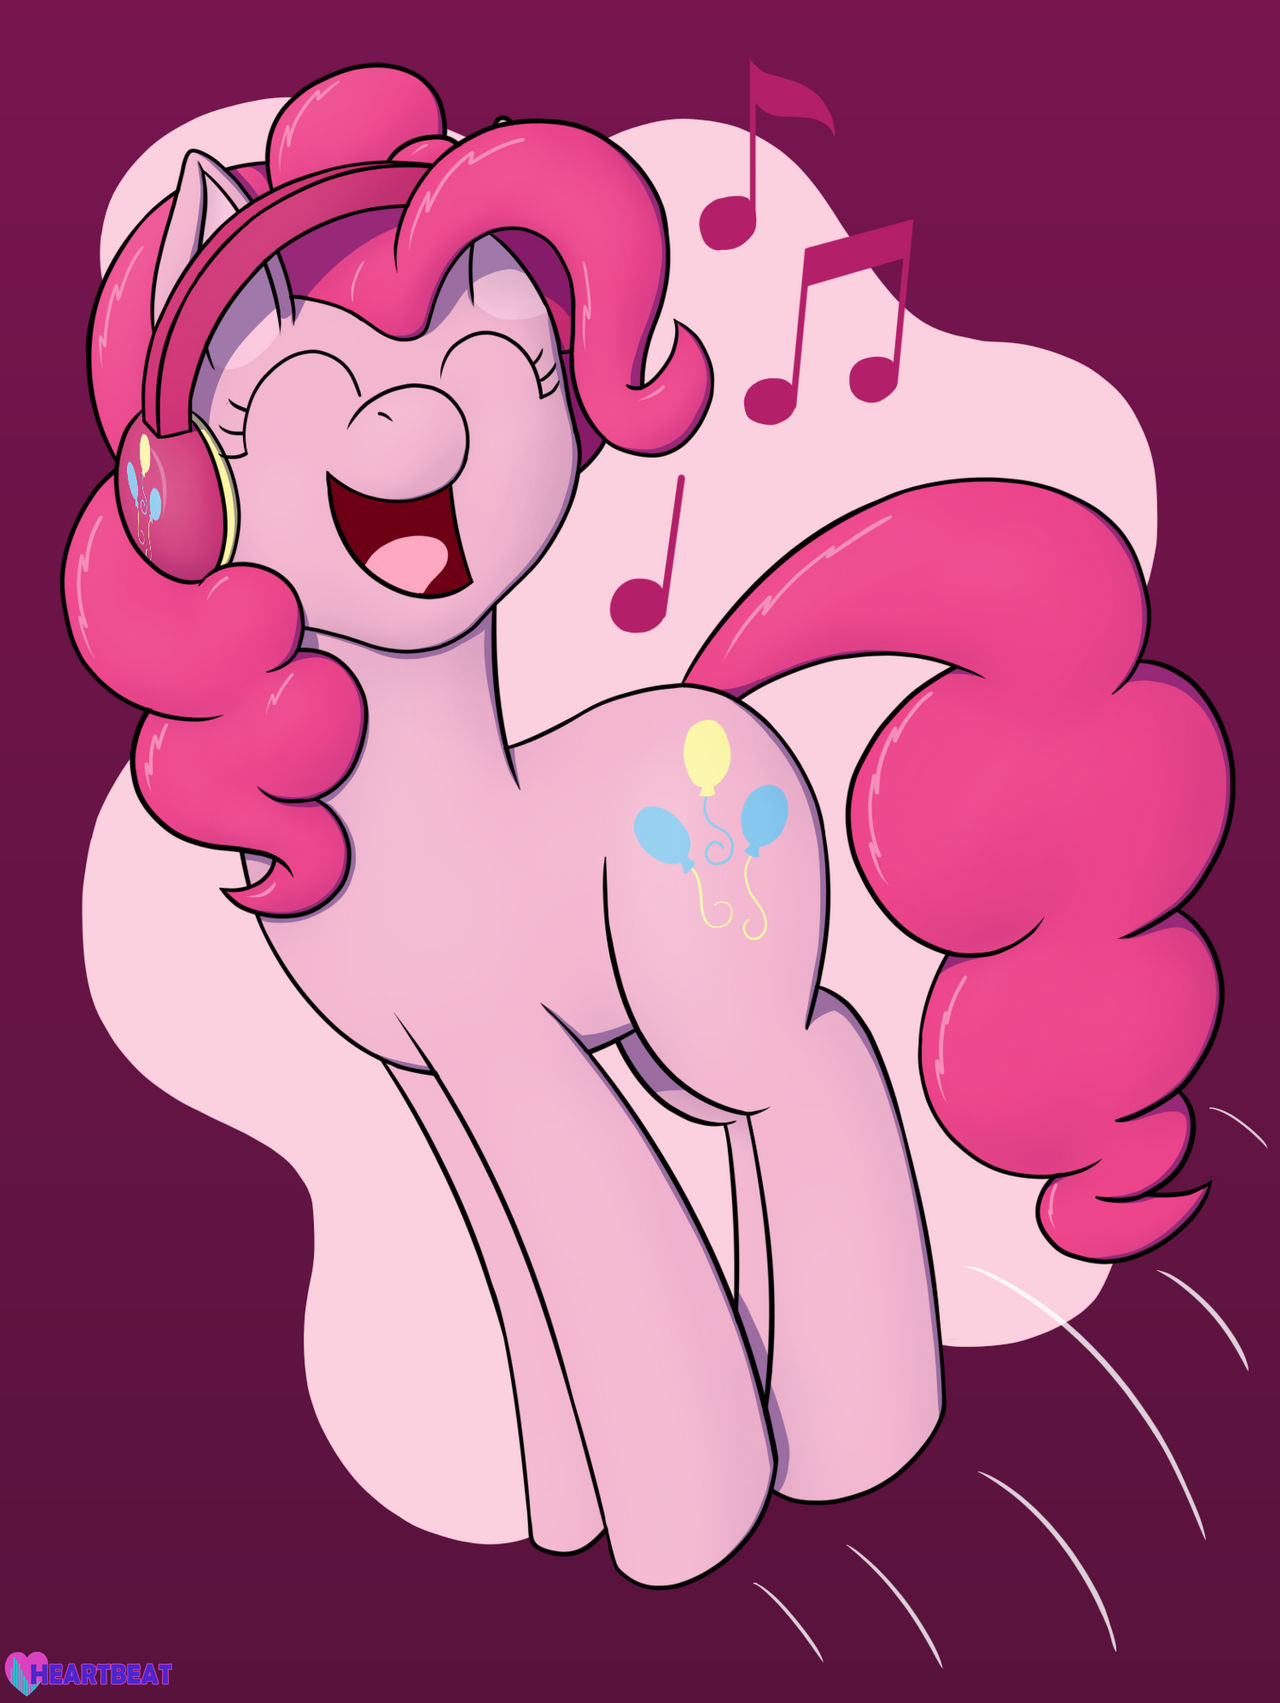 pinkie_with_headphones_by_passionpanther_dfpi6i9-fullview.jpg